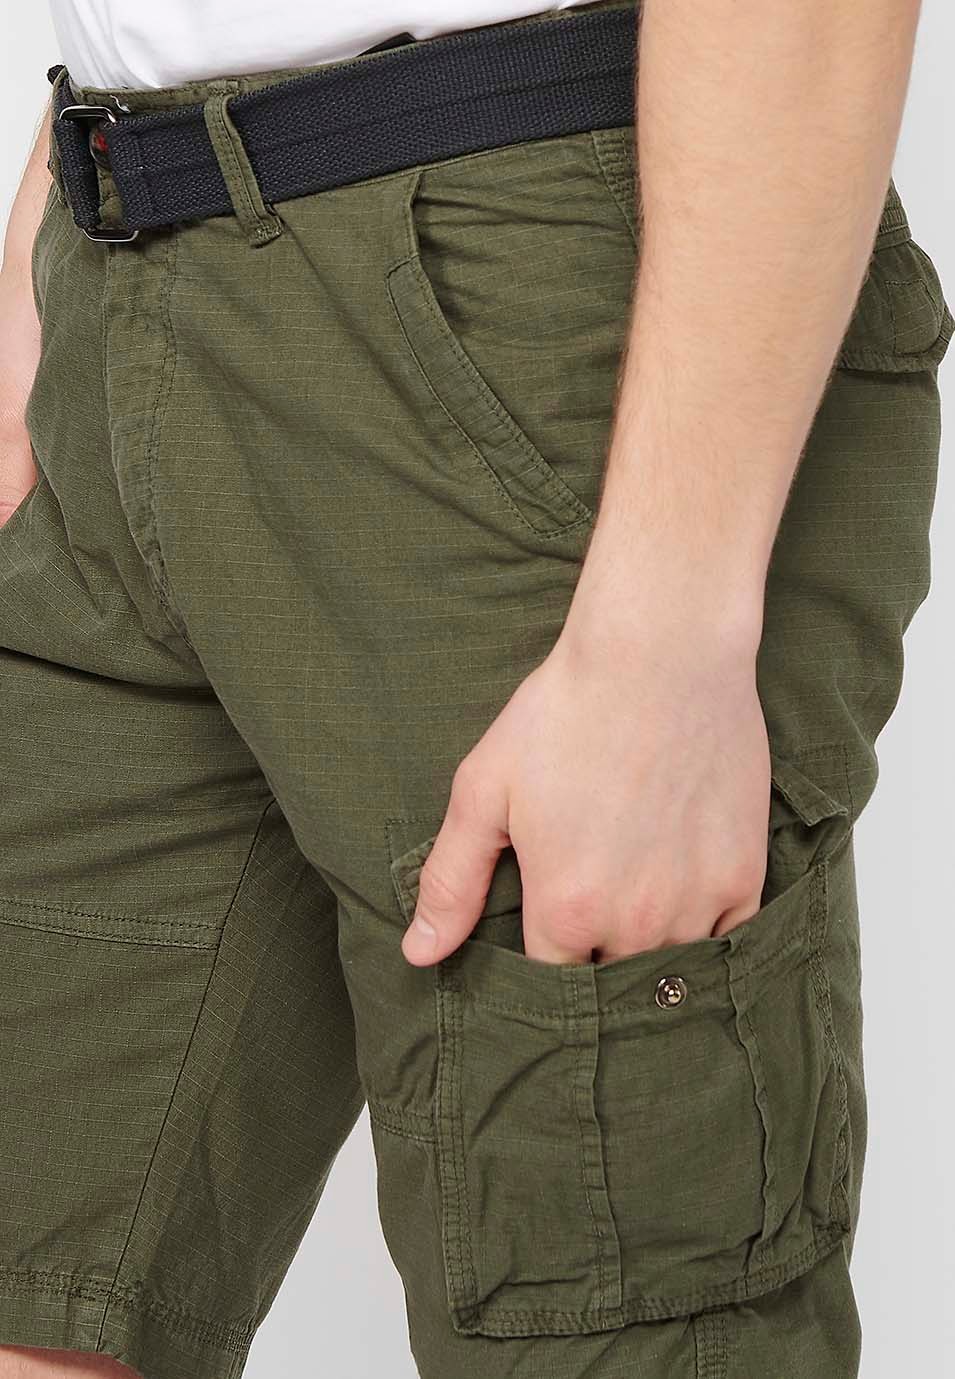 Cotton cargo shorts with belt and front closure with zipper and button with pockets, two back pockets with flap and two green cargo pants for Men 8